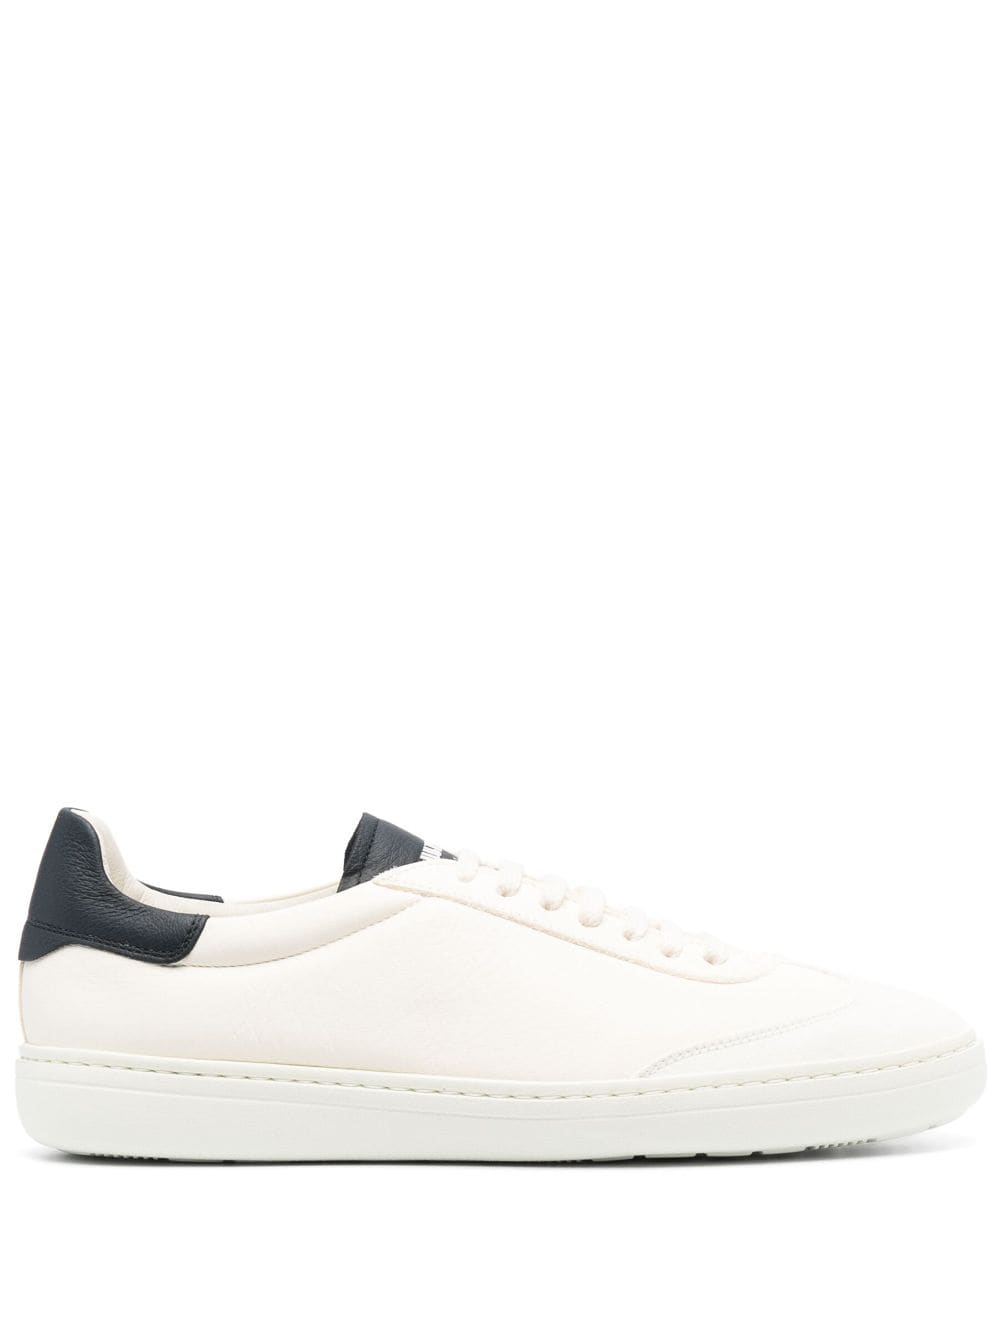 CHURCH'S Timeless Luxury Leather Sneakers for Men - Ivory White and Navy Blue